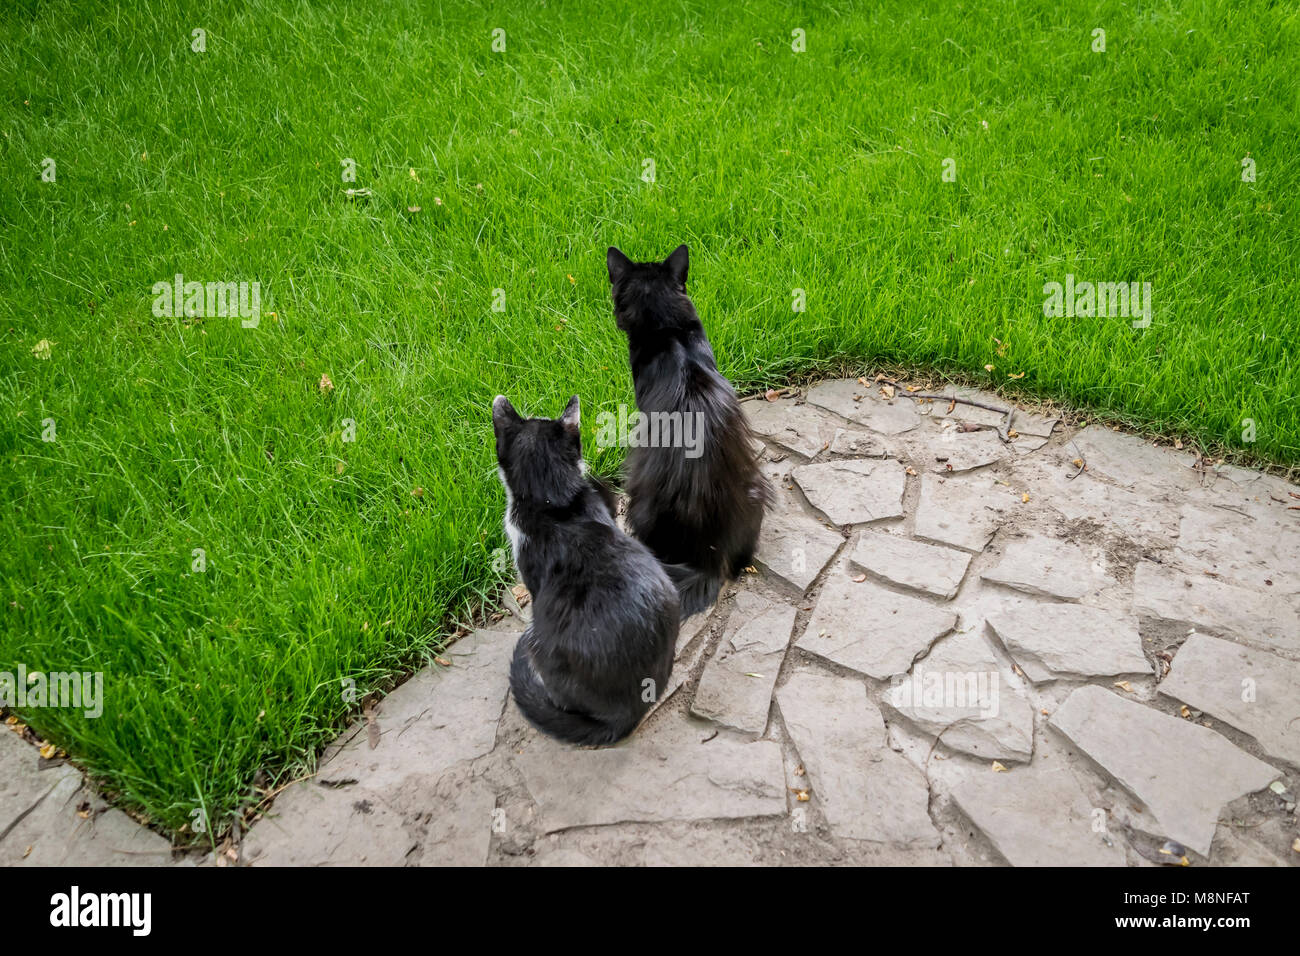 Two curious cats sitting next to each other. Black and a black and white spotted kitten sitting close on the garden stone path,green grass background. Stock Photo